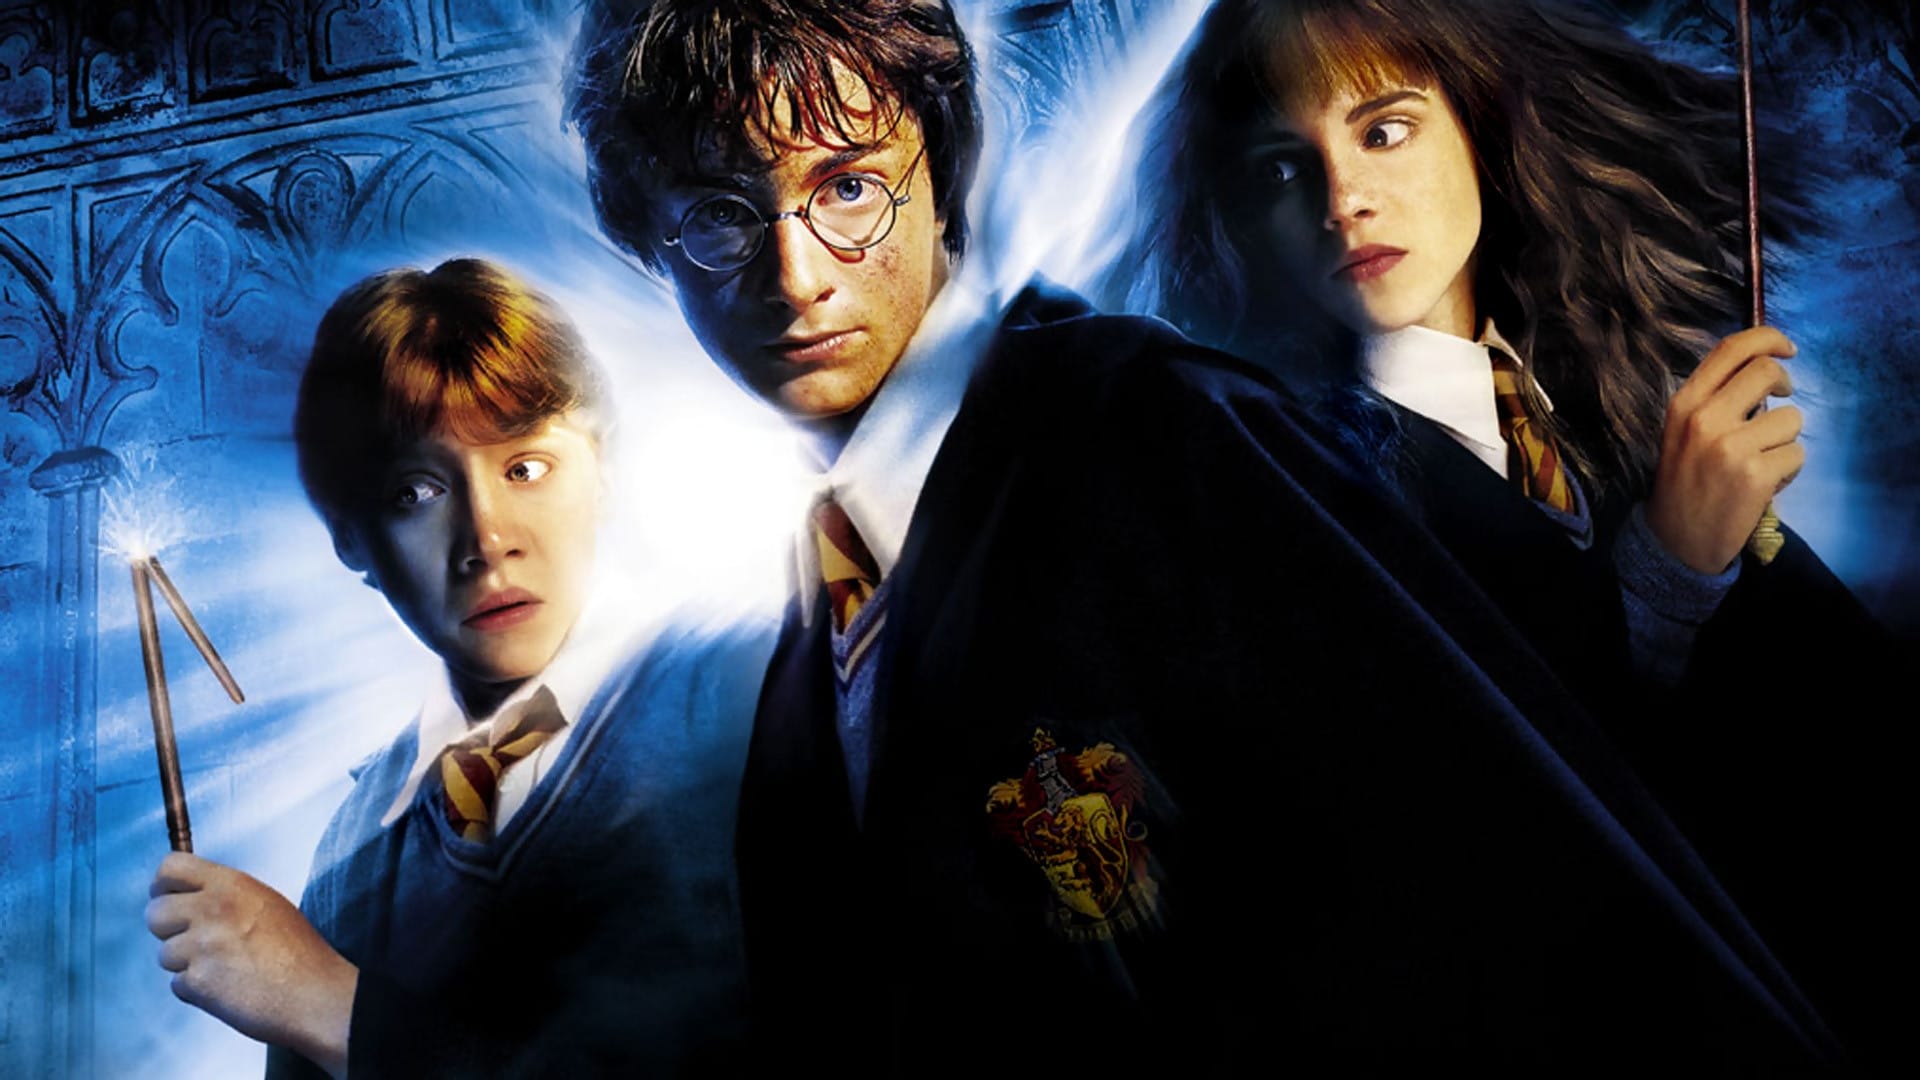 Harry Potter and the Chamber of Secrets (2002) - Watch Full Movie - Harry Potter And The Chamber Of Secrets Movie Online Free